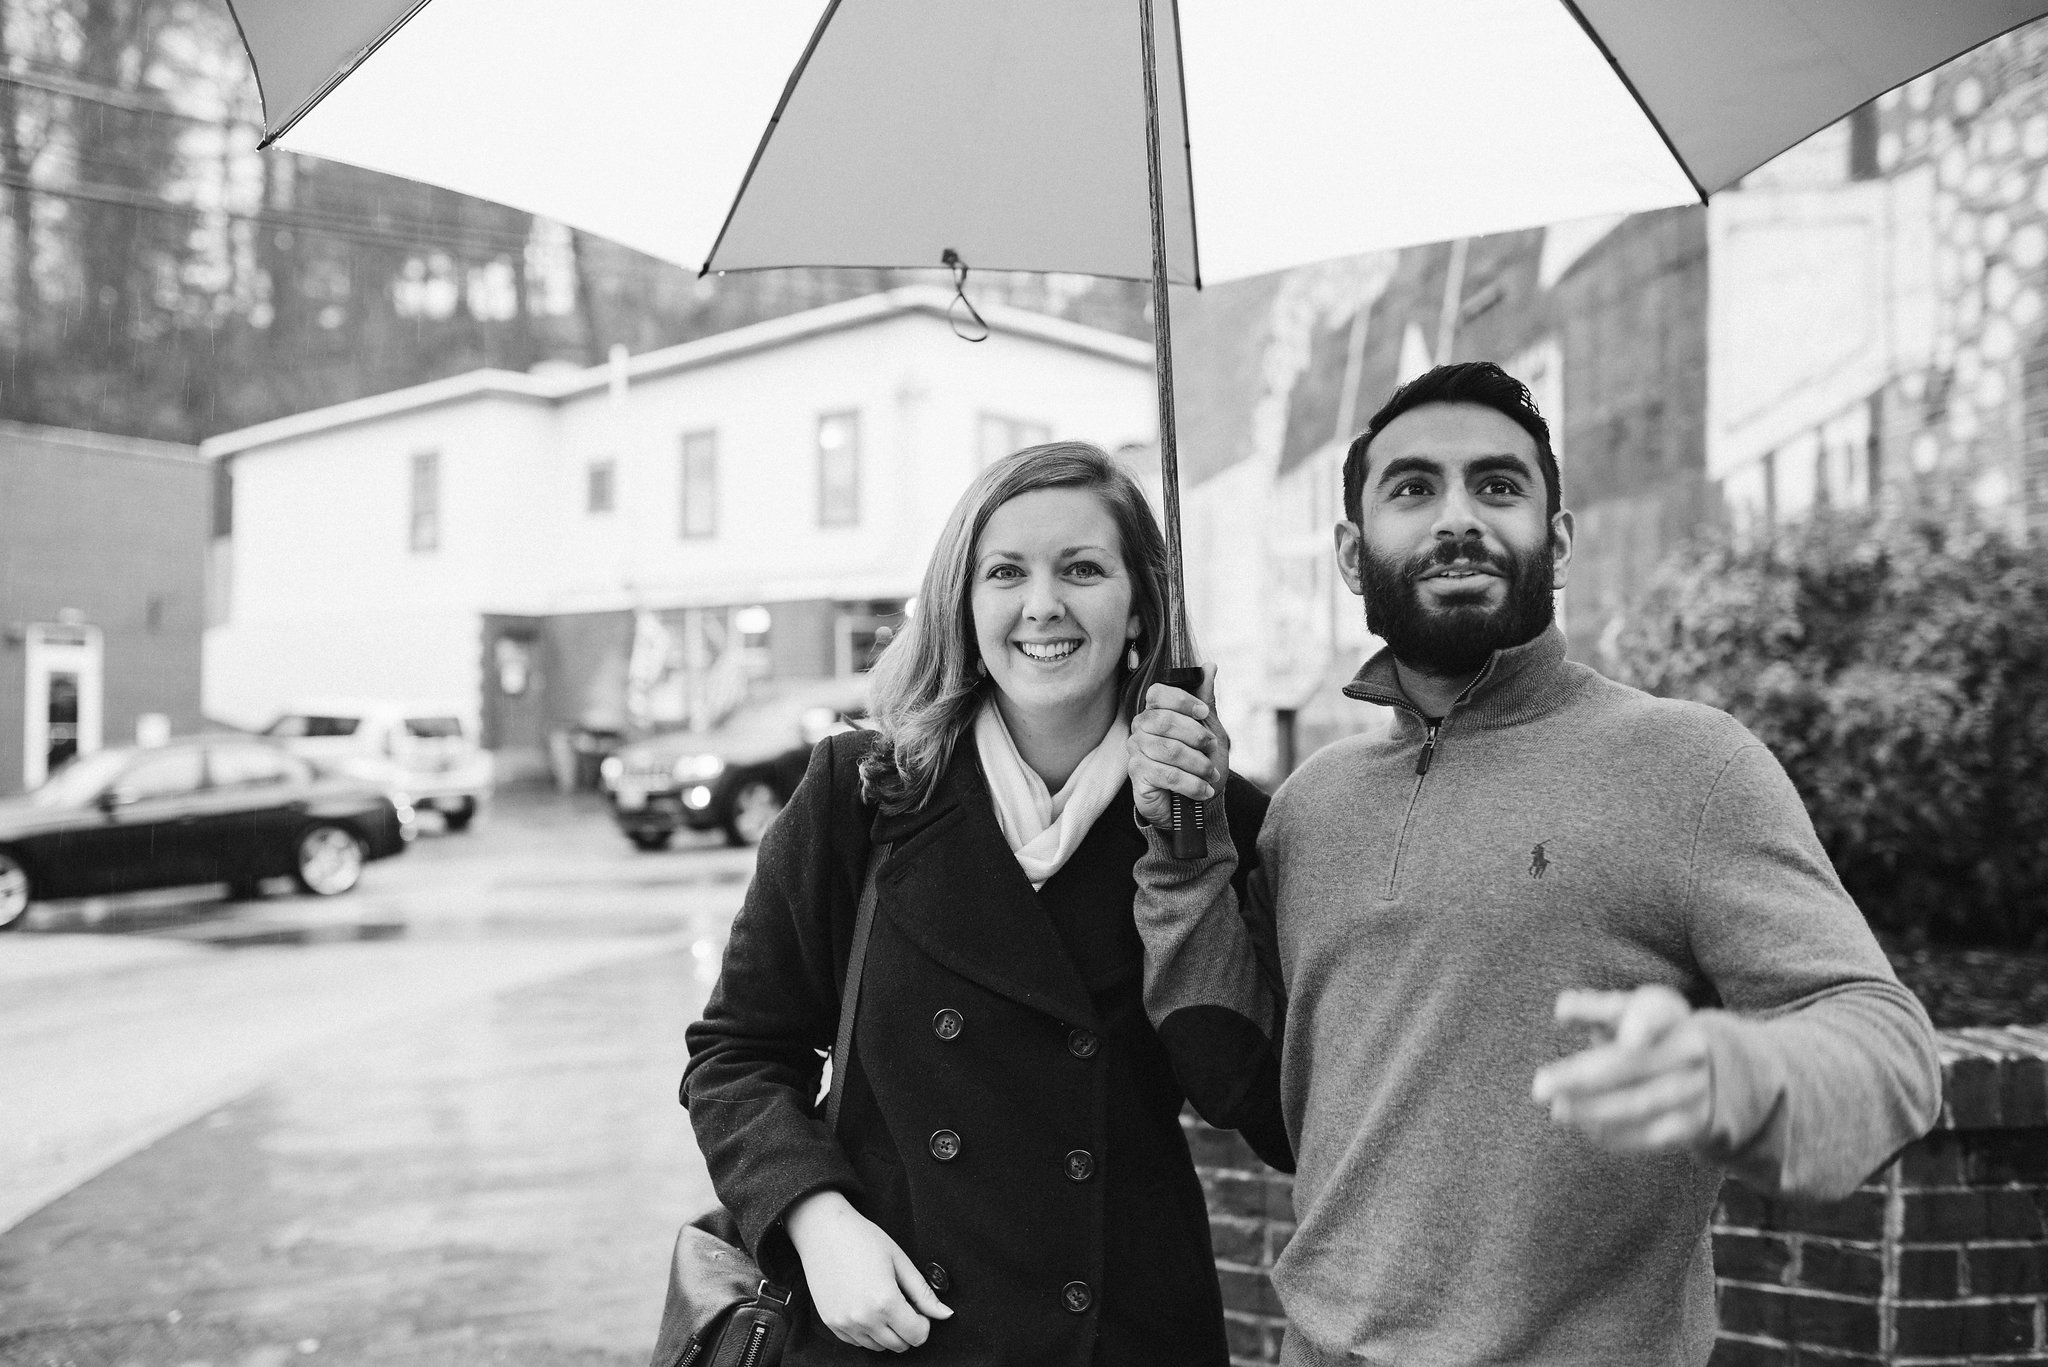 Engagement Photos, Rainy, Ellicott City, Maryland Wedding Photographer, Winter, Overhills Mansion, Indian American, Historical, Classic, Traditional, Outdoor, Black and White Photo